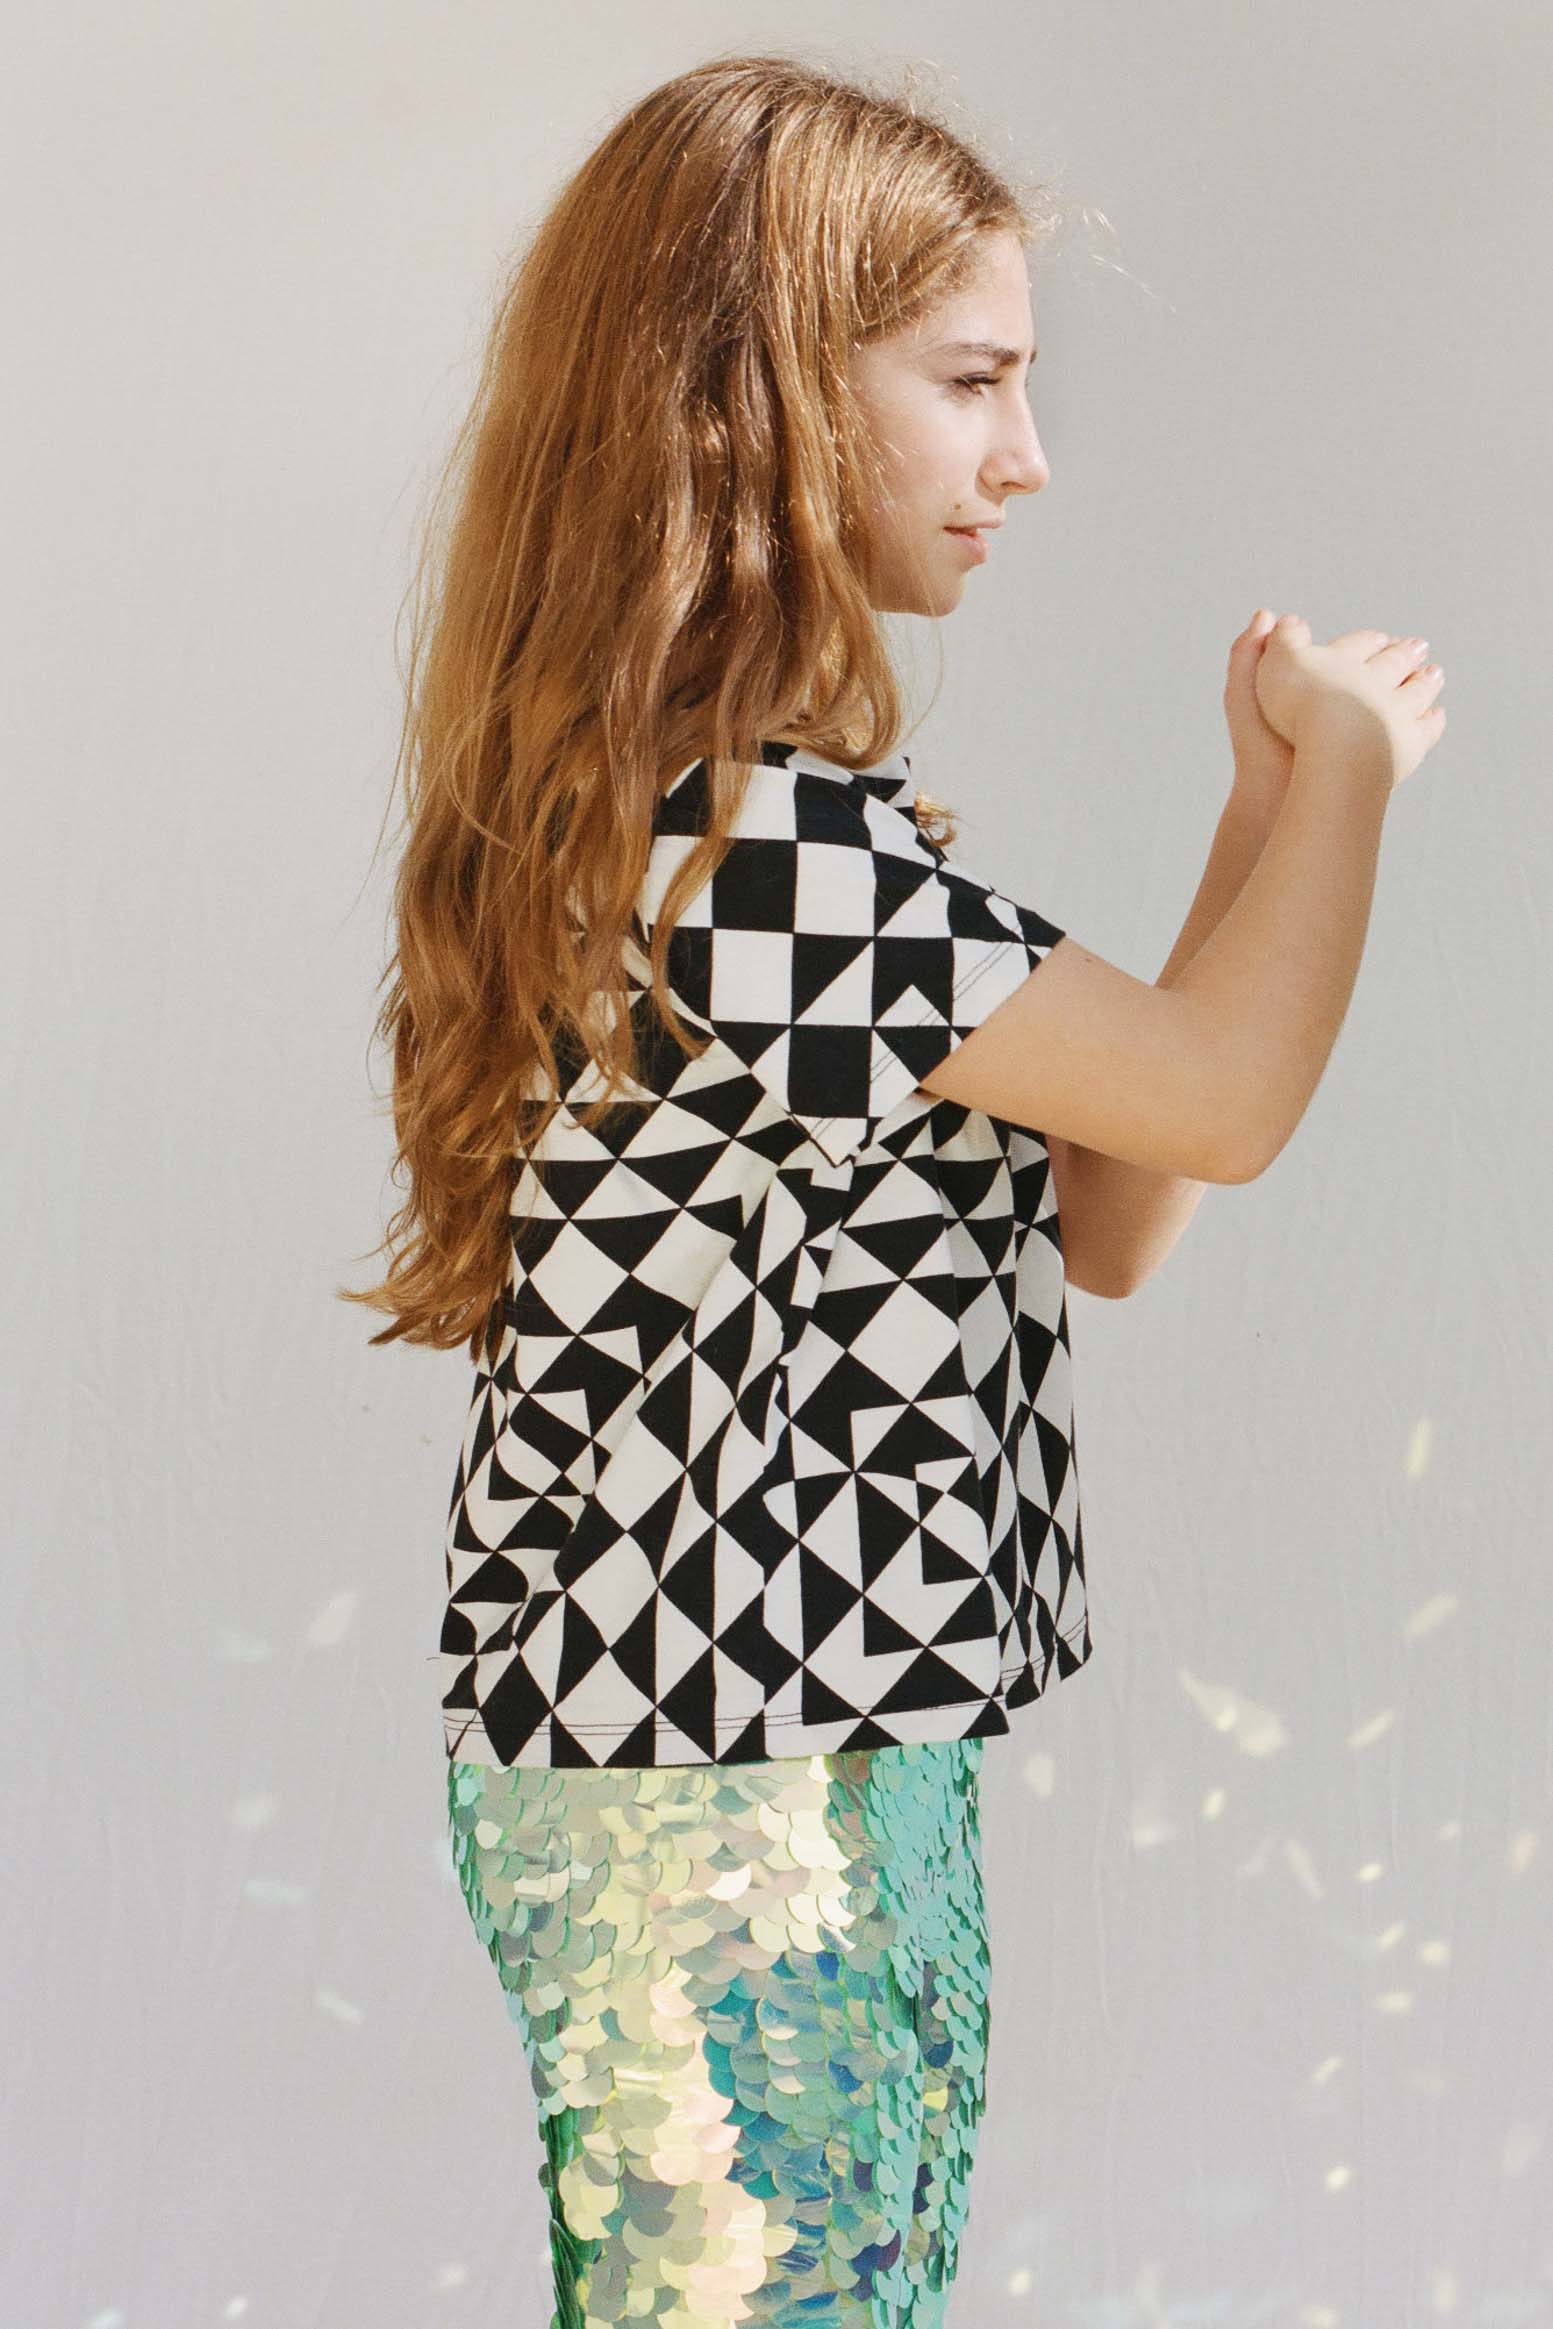 A girl with long hair standing side on to the camera in a brightly lit outdoor space wearing Rosa Bloom chameleon mint green children’s leggings, with contrasting bold graphic black and white tri-print t-shirt.